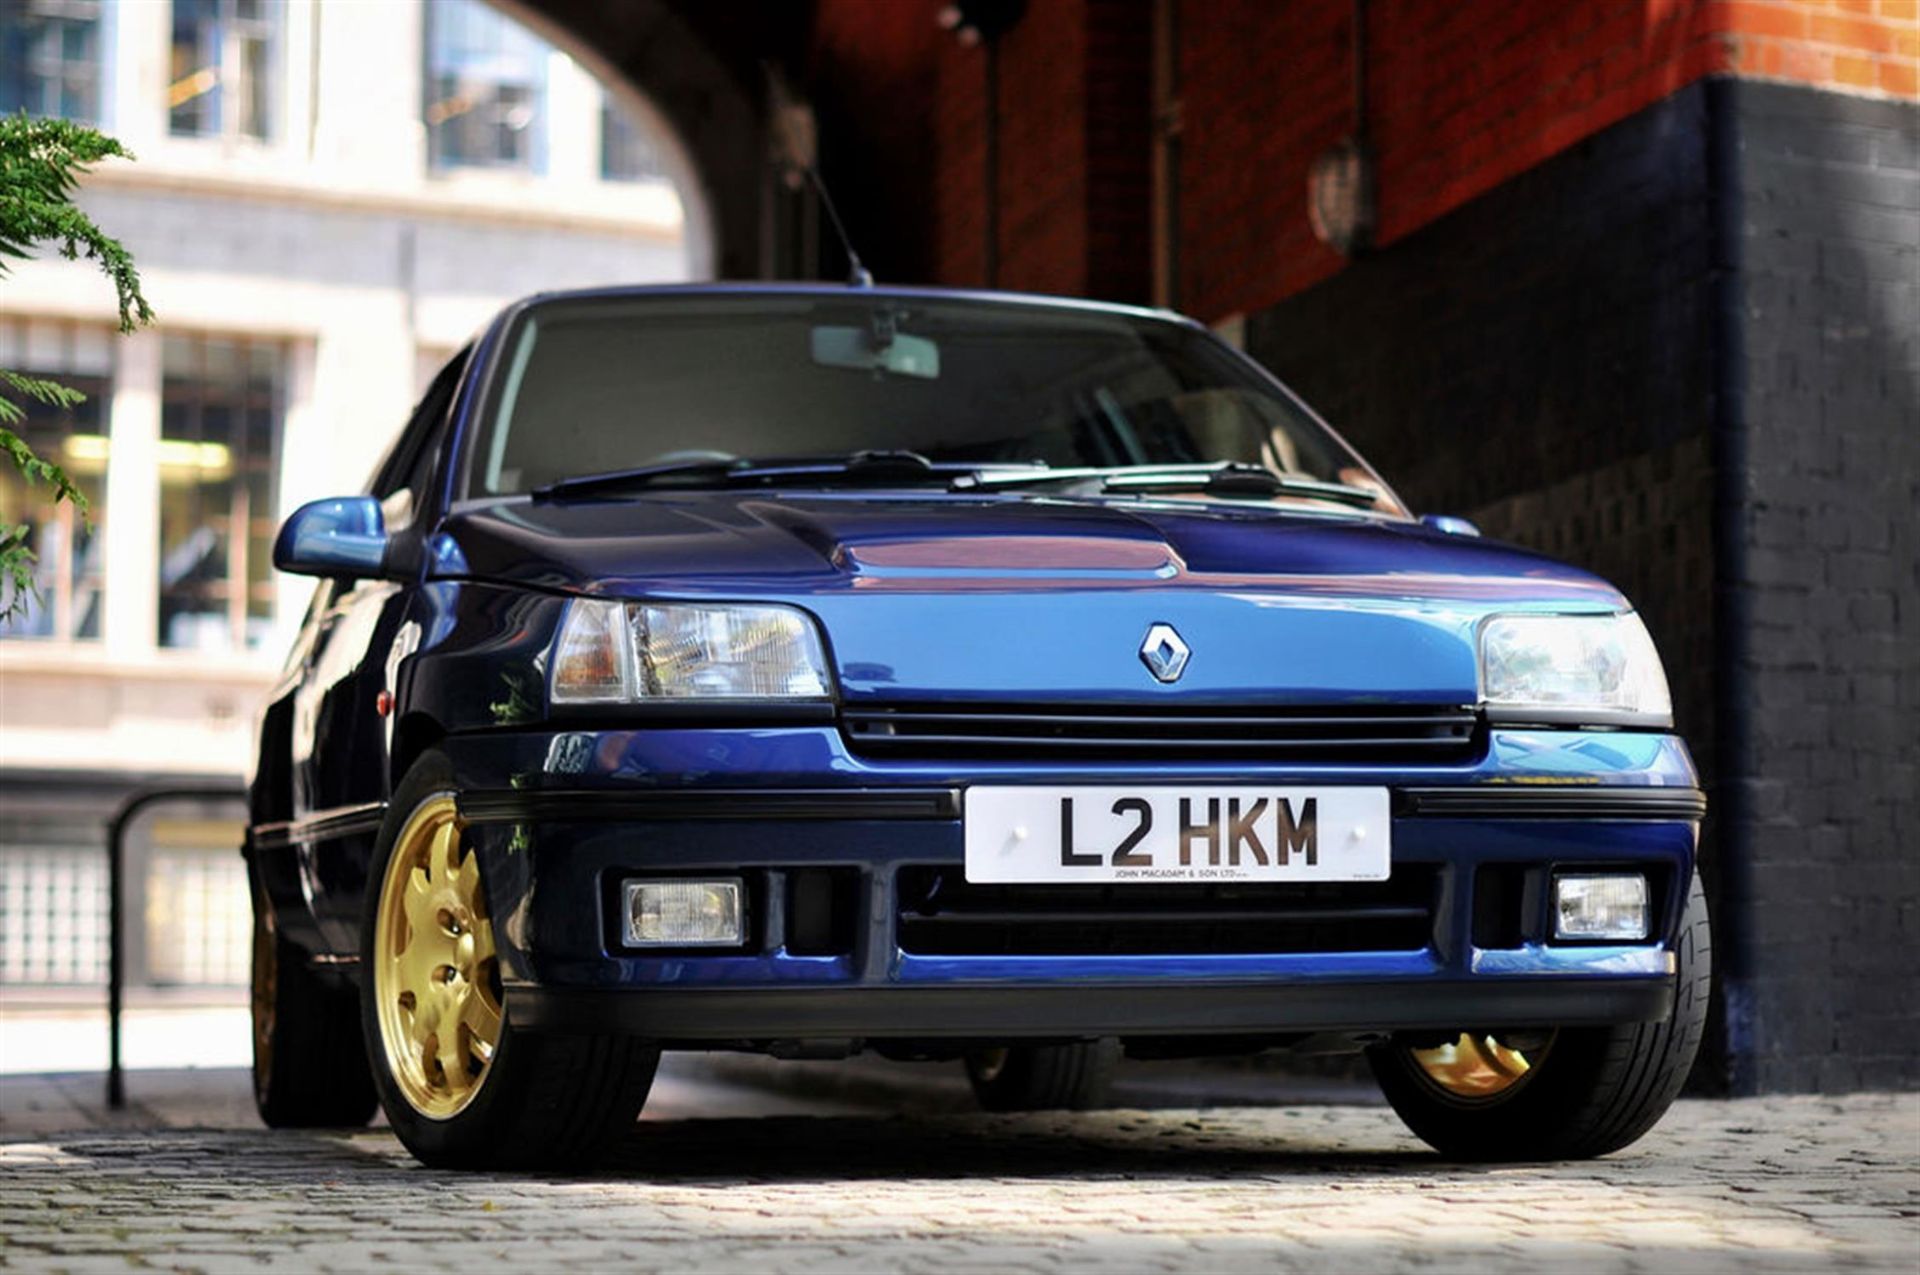 1994 Renault Clio Williams (Phase One) #0180 - Image 6 of 10